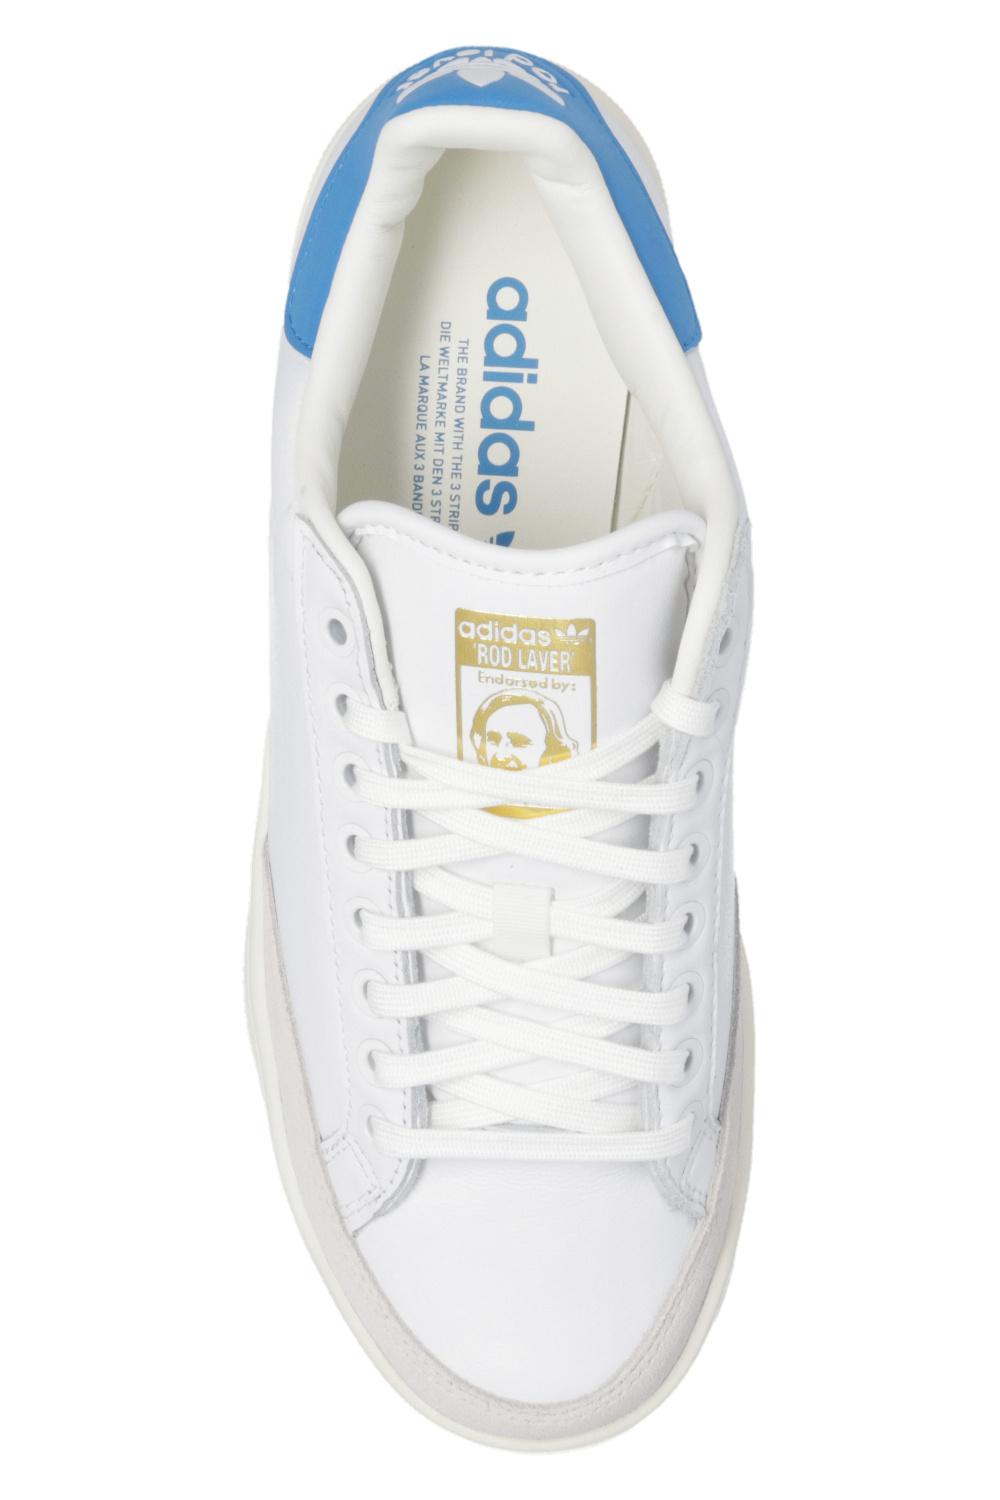 adidas Originals Leather 'rod Laver' Sneakers in White | Lyst